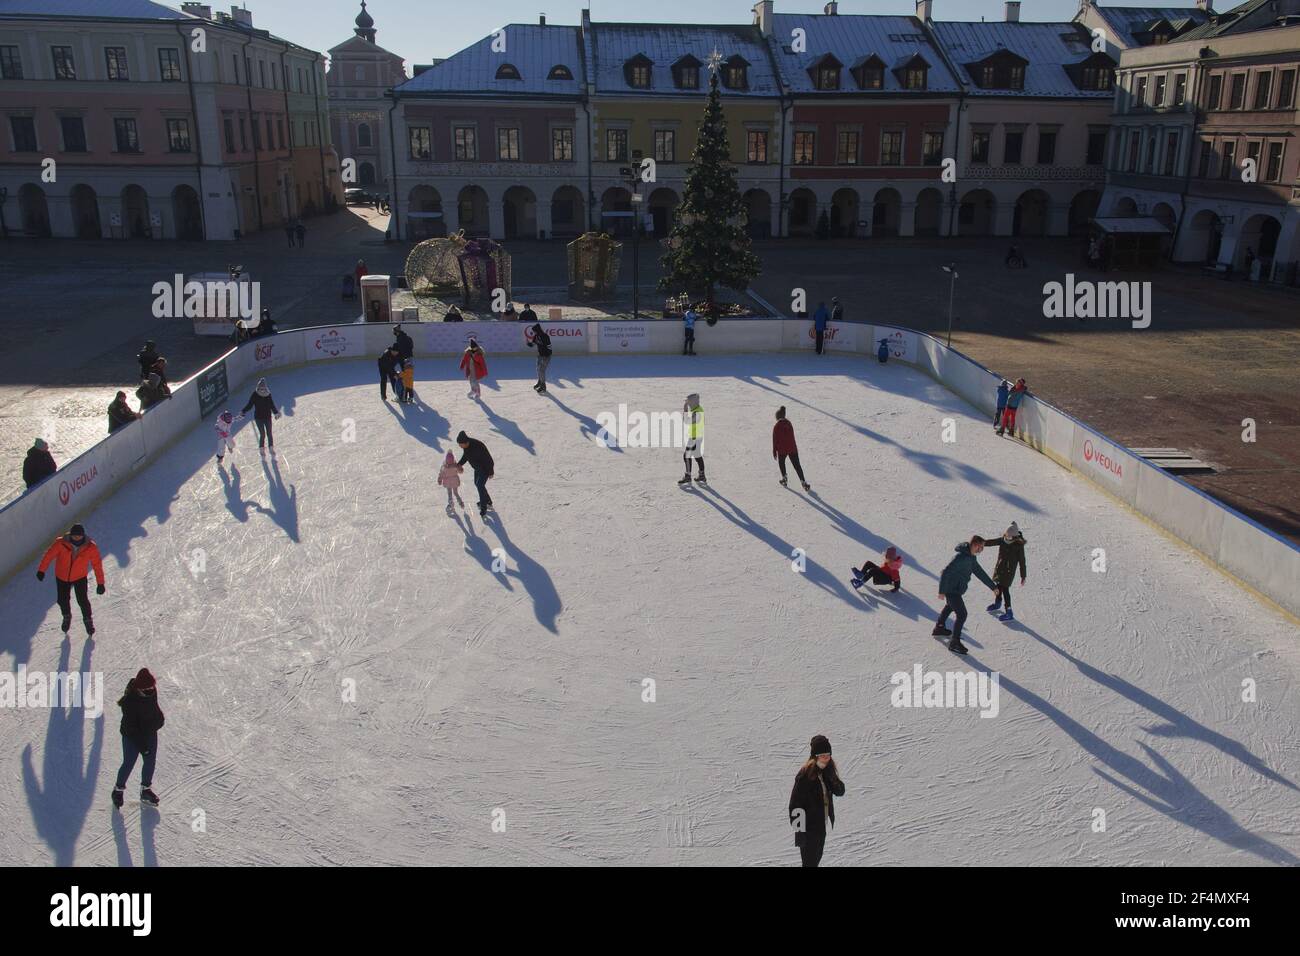 Zamosc, Poland, December 27, 2020. Townspeople skate on an ice skating rink on a sunny winter morning. Skating rink in the central square of the city. Stock Photo